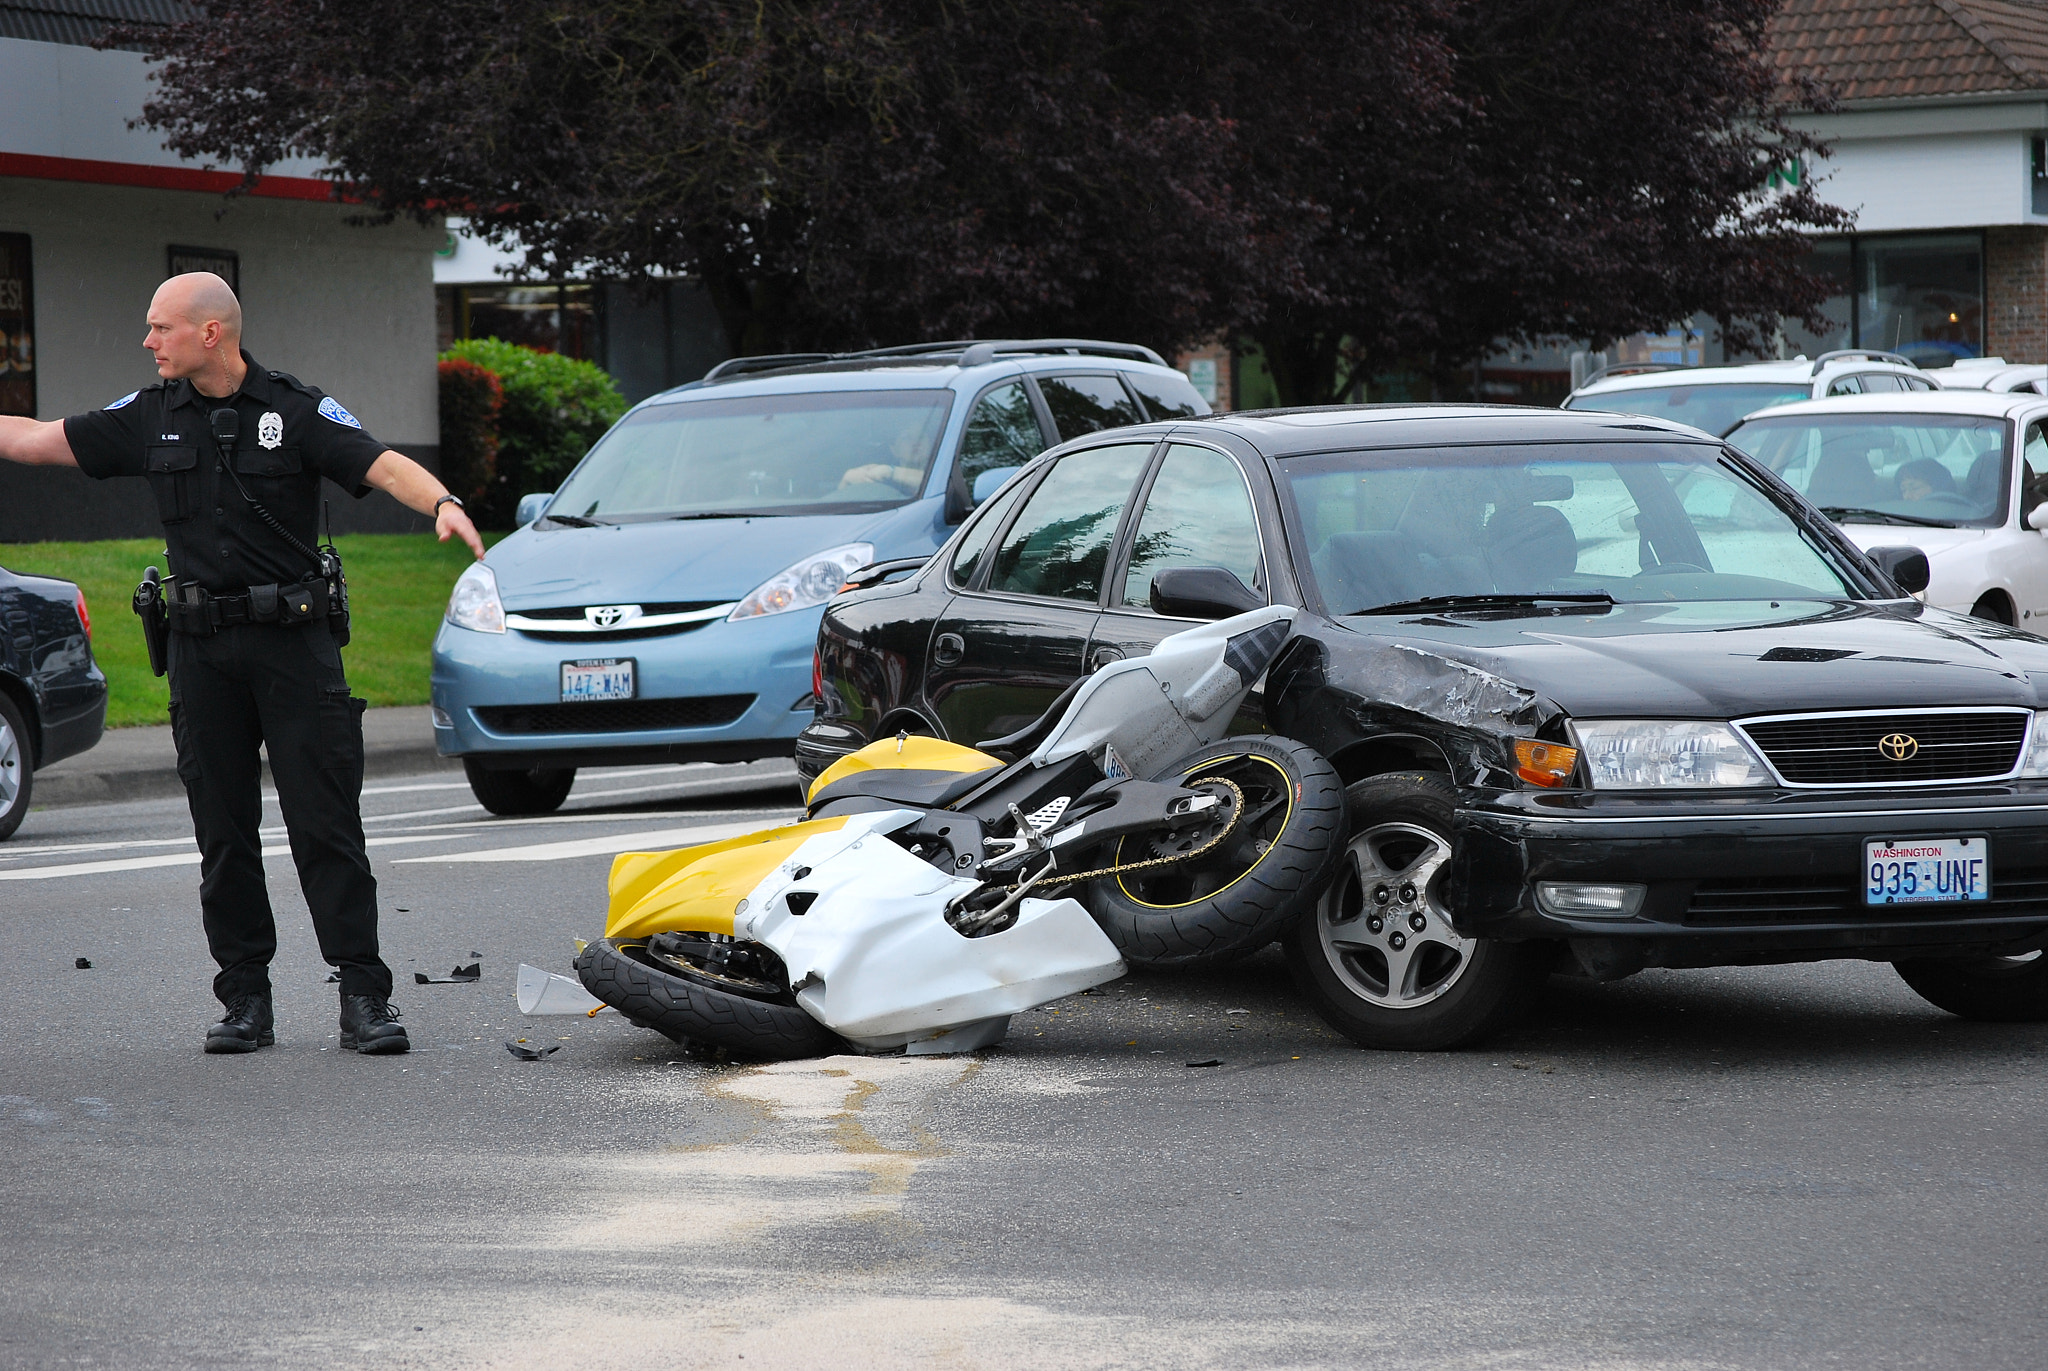 Car, motorcycle accident.